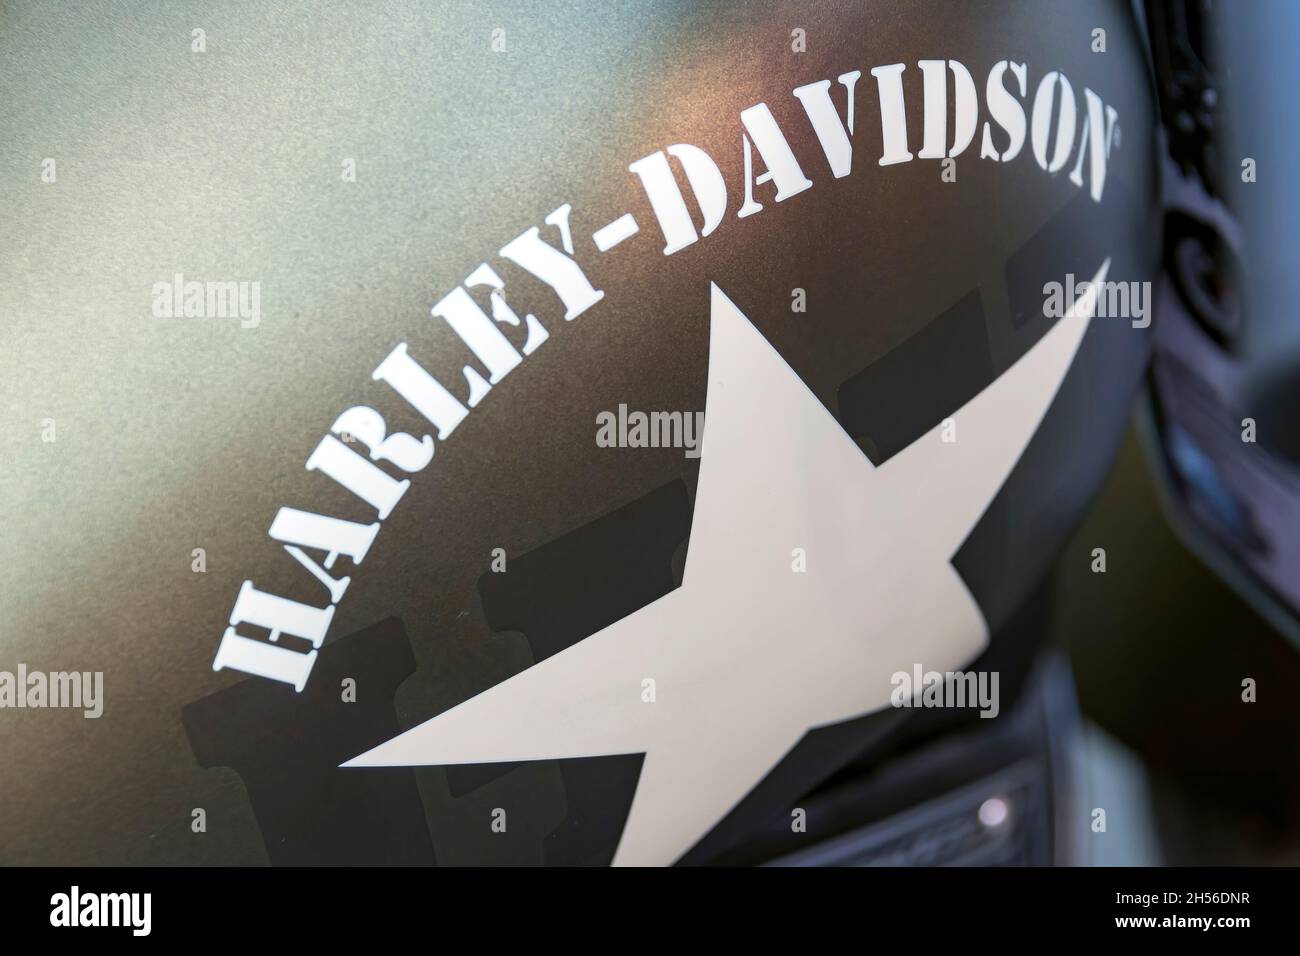 Logo of Harley-Davidson motorcycle in the gas tank of a vehicle seen in Toronto Canada. Nov. 6, 2021 Stock Photo